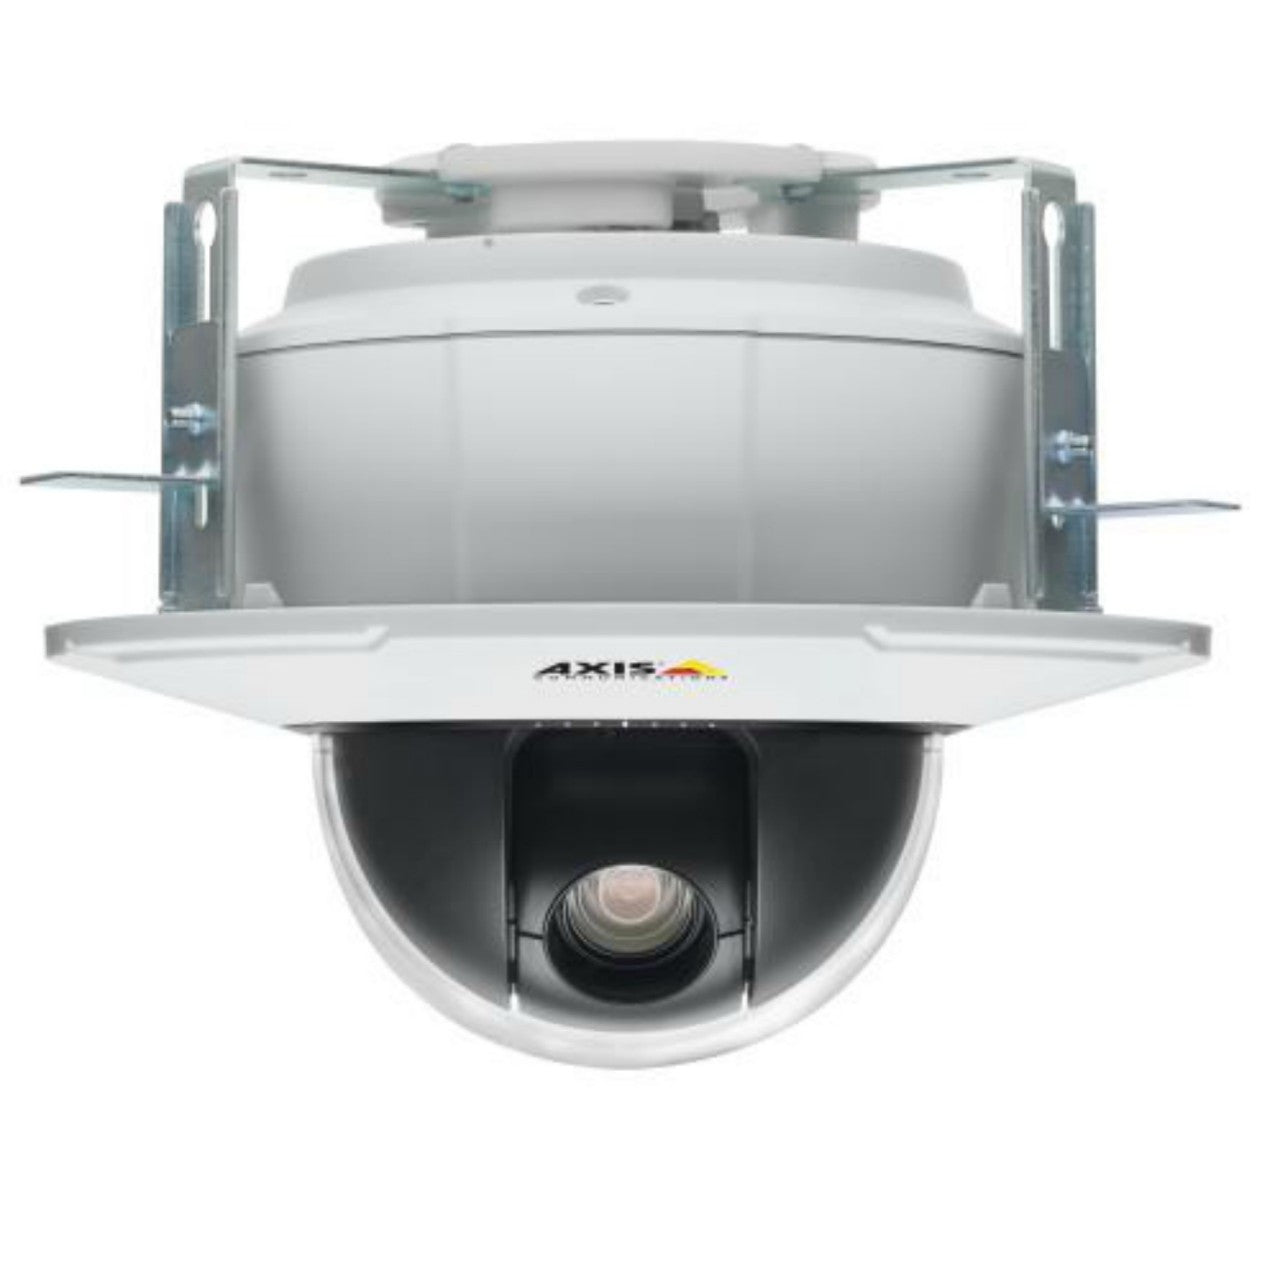 AXIS P5522 (0420-004) PTZ Dome Network Camera